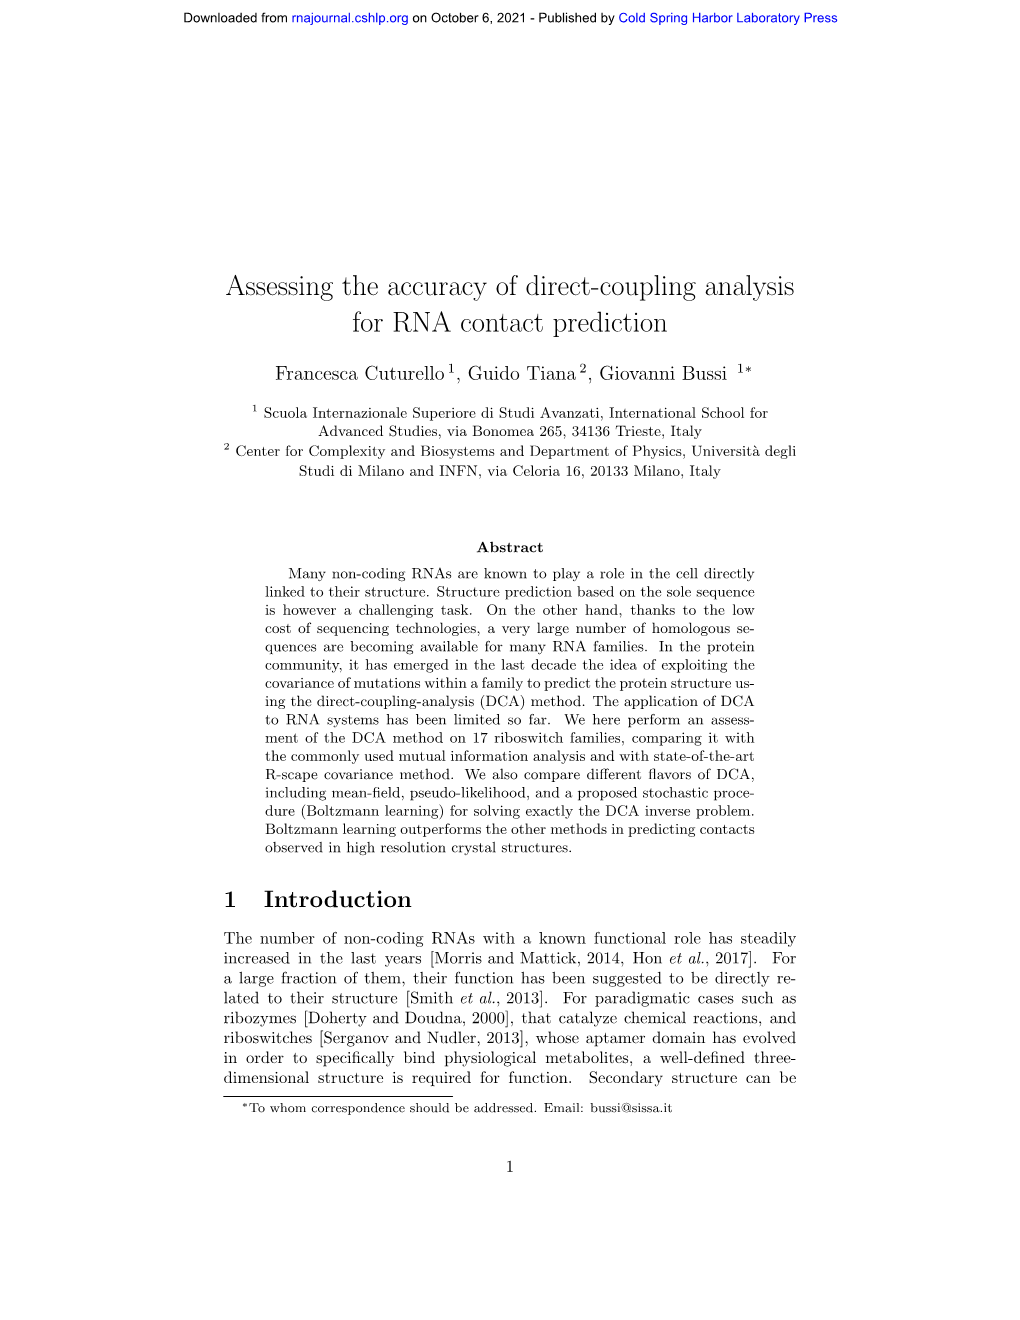 Assessing the Accuracy of Direct-Coupling Analysis for RNA Contact Prediction